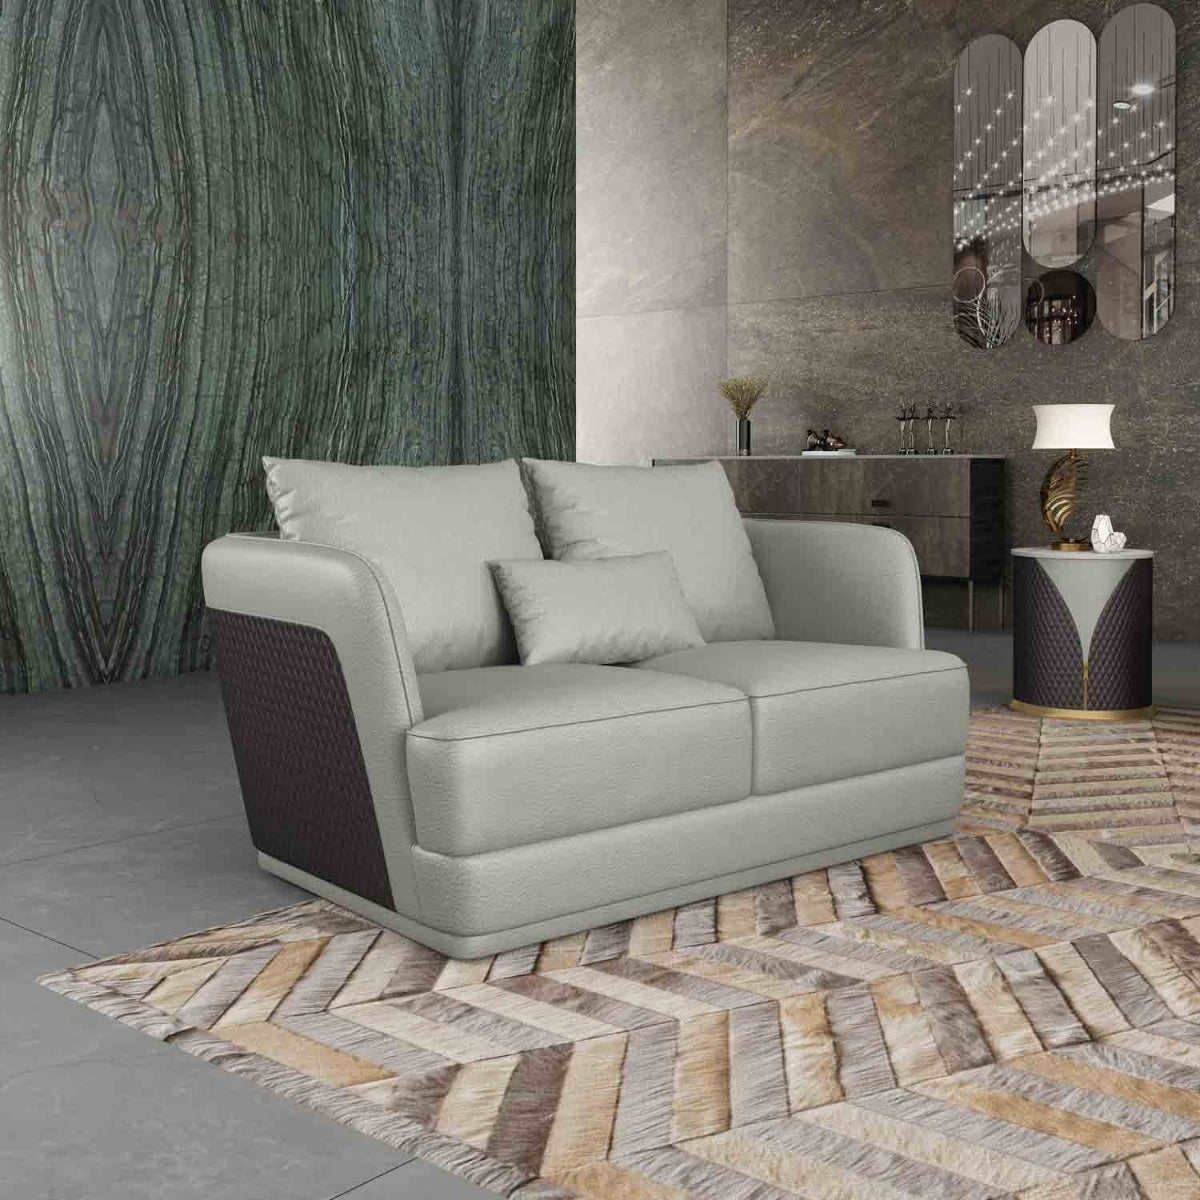 European Furniture - Glamour 3 Piece Living Room Set in Grey-Chocolate - 51618-3SET - New Star Living